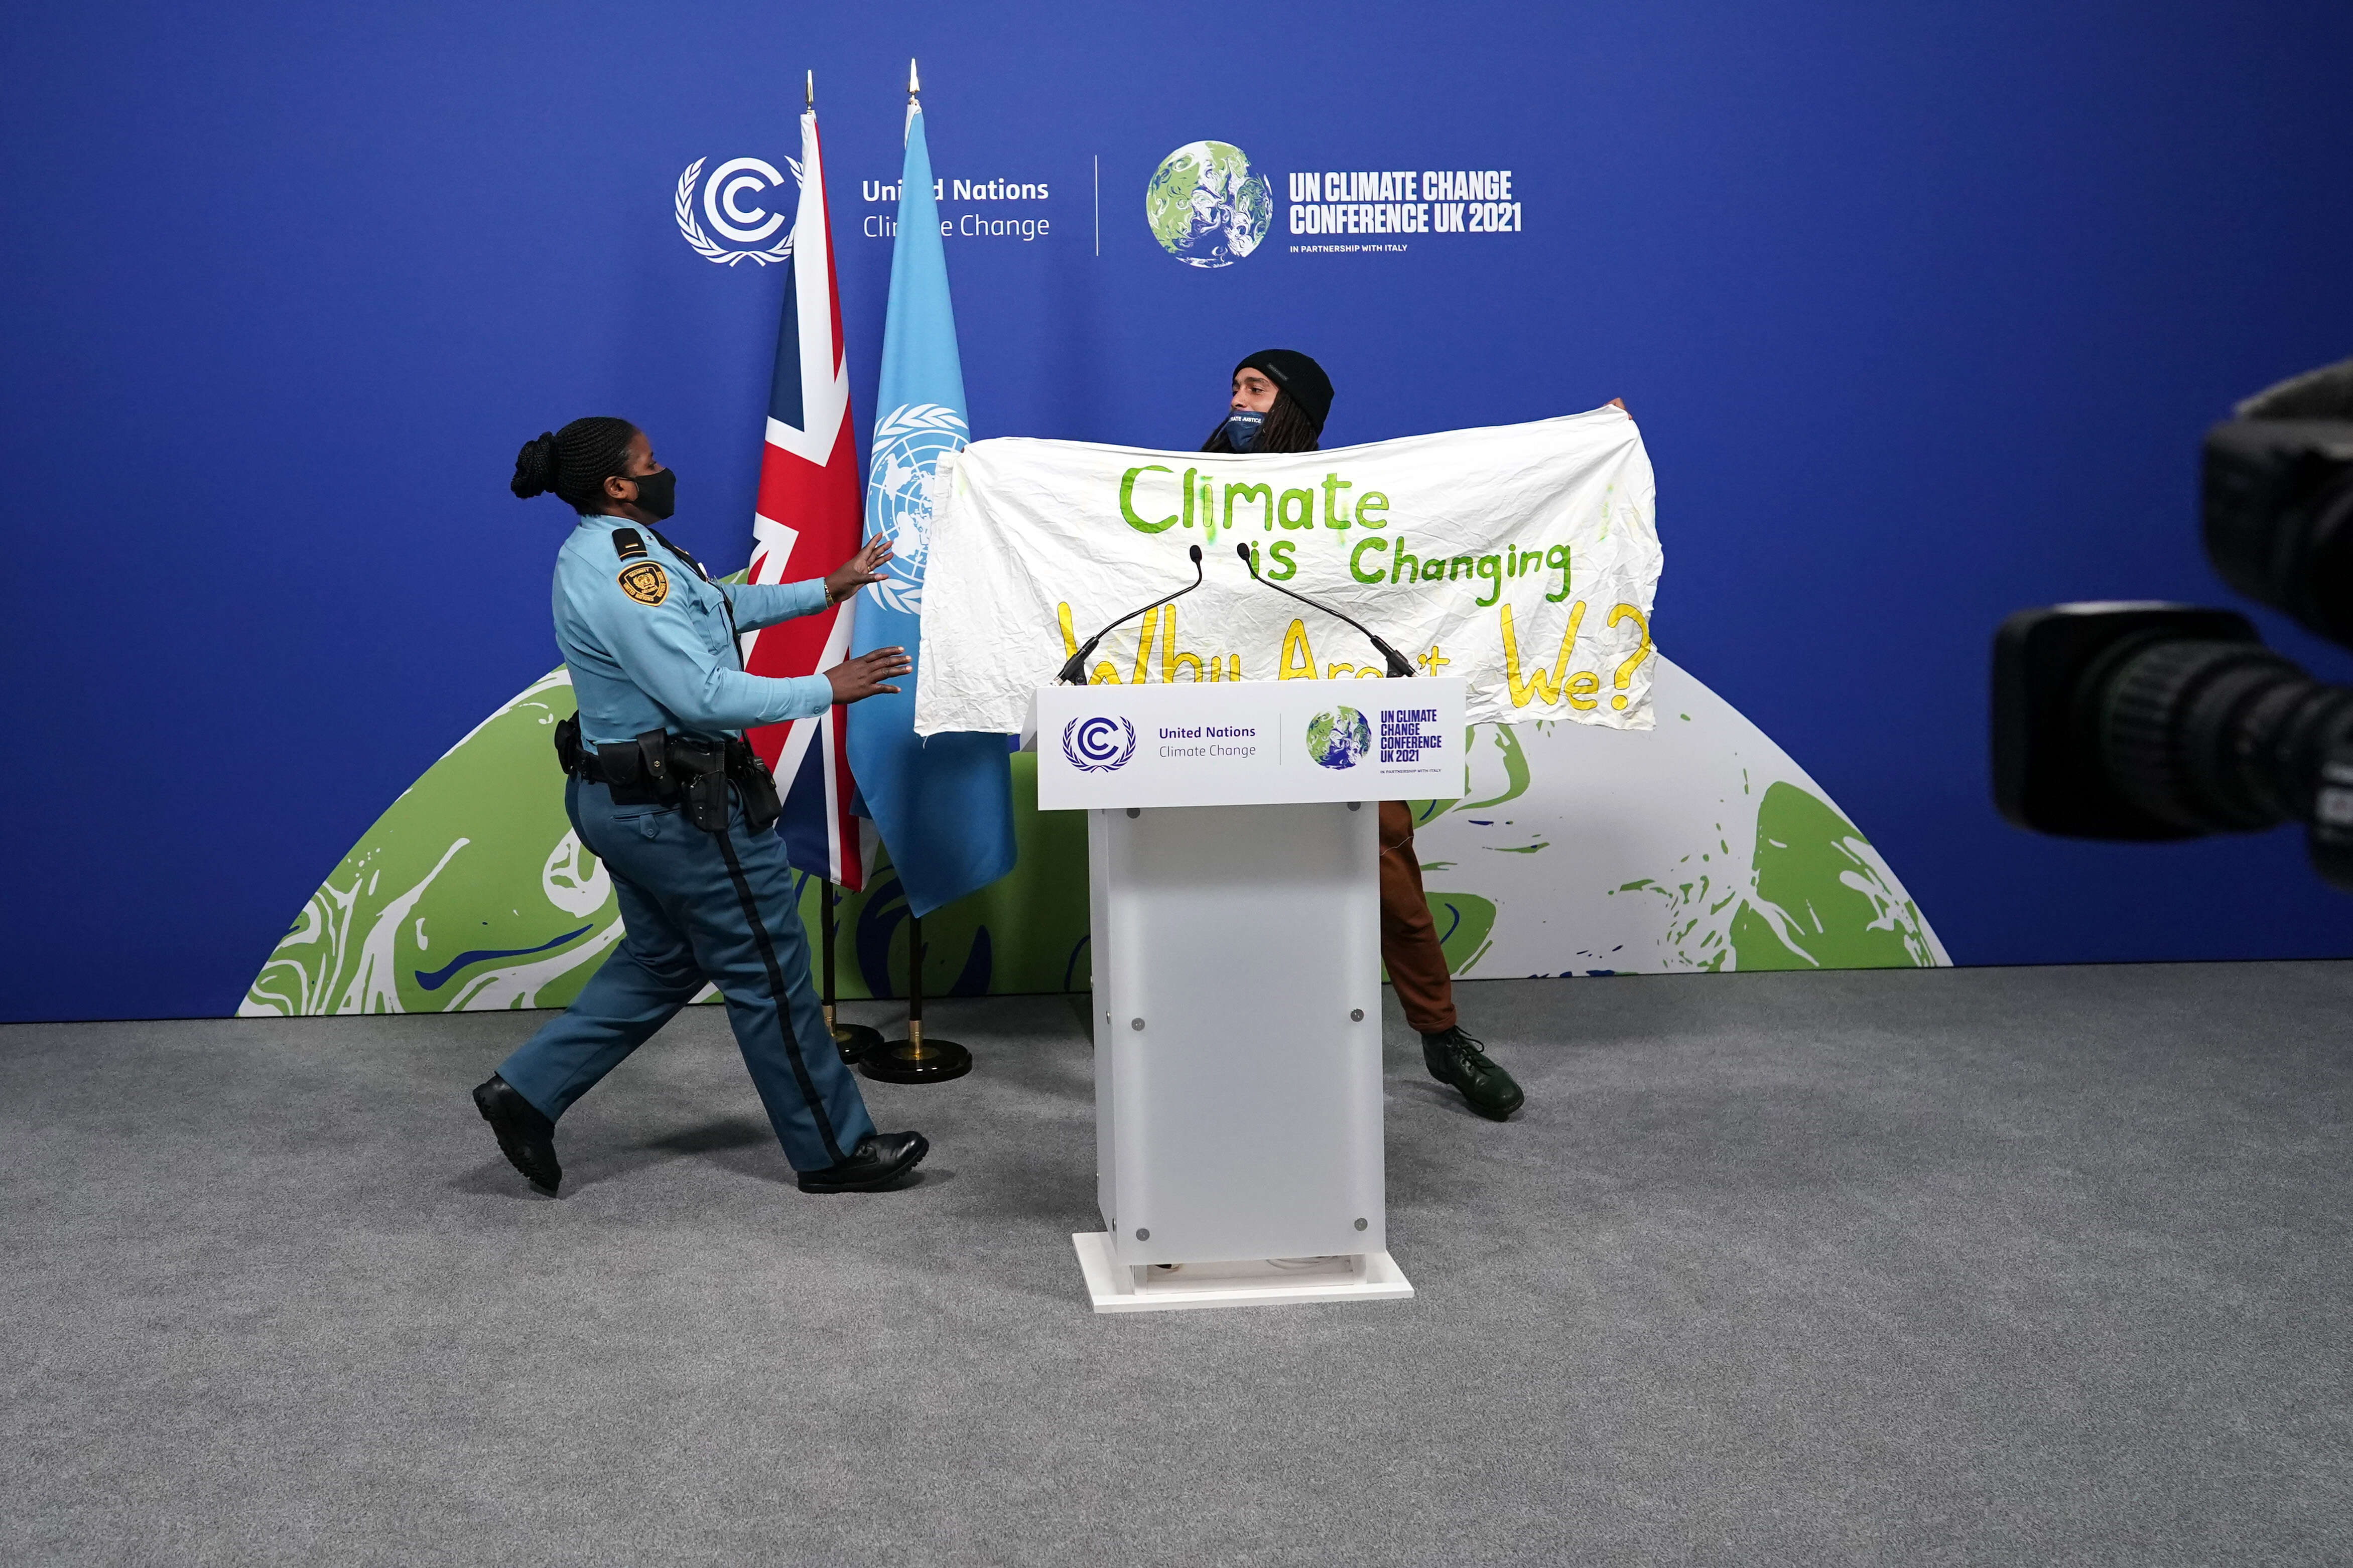 Cop27 shows us that governments have short memories